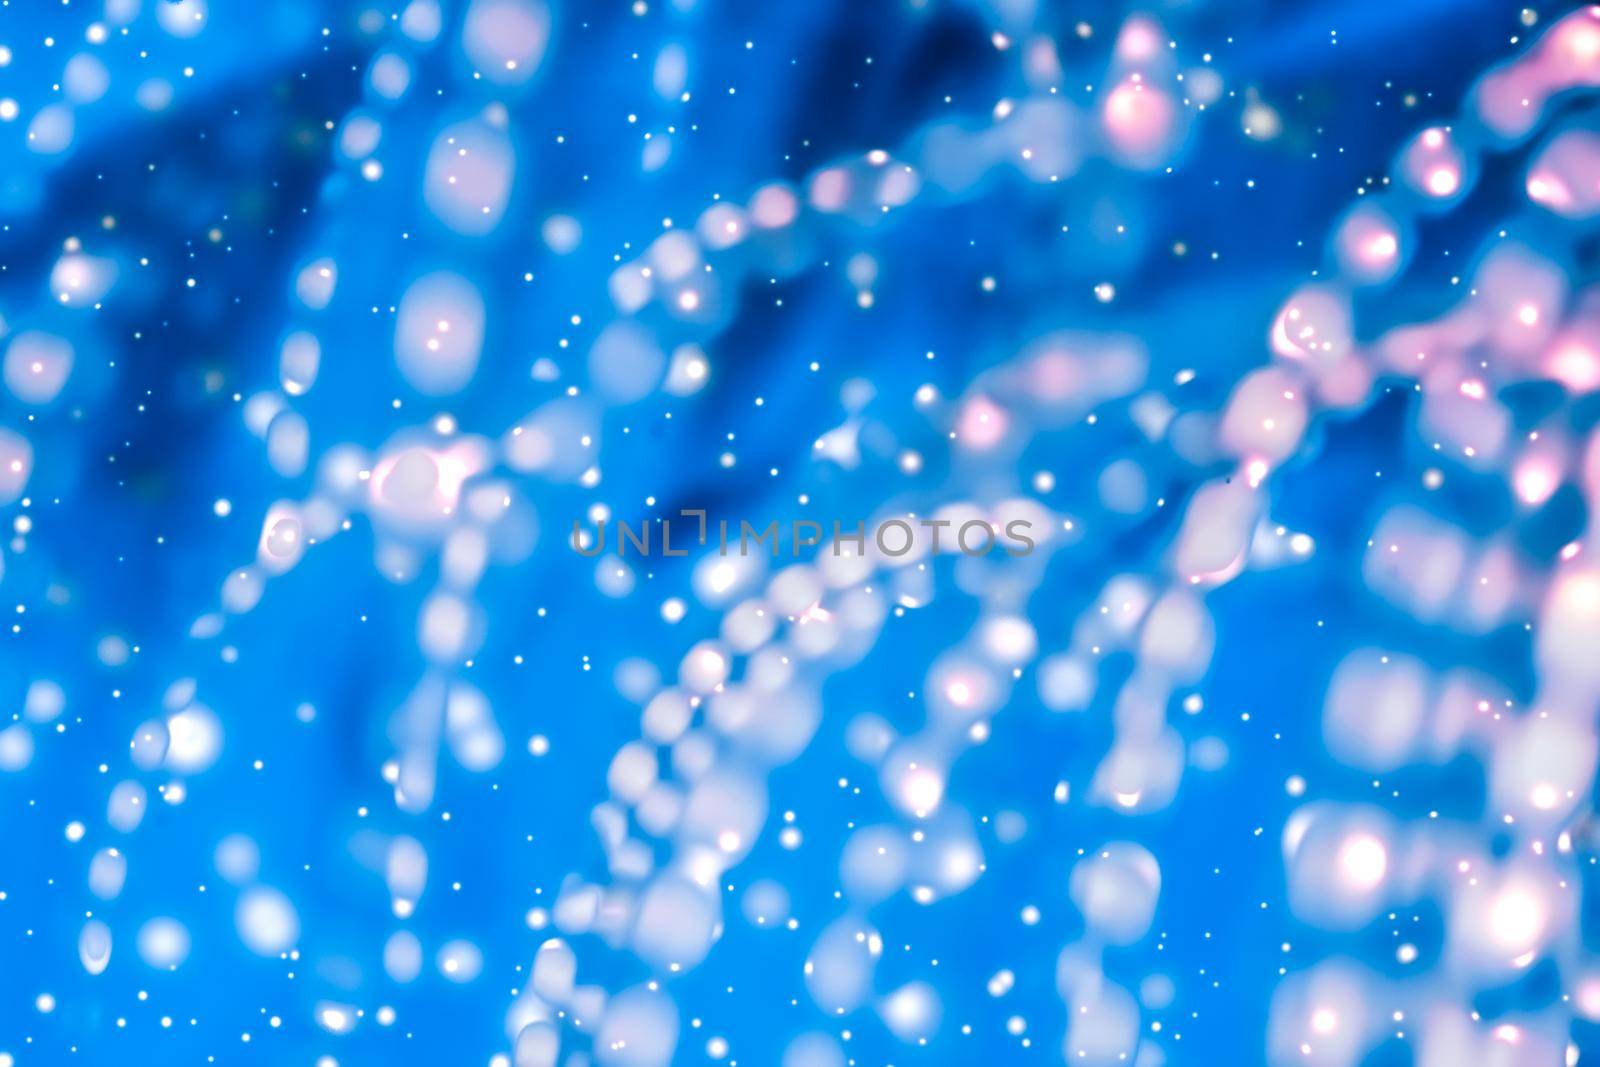 Christmas lights, New Years Eve fireworks and abstract texture concept - Magic sparkling shiny glitter and glowing snow, luxury winter holiday background